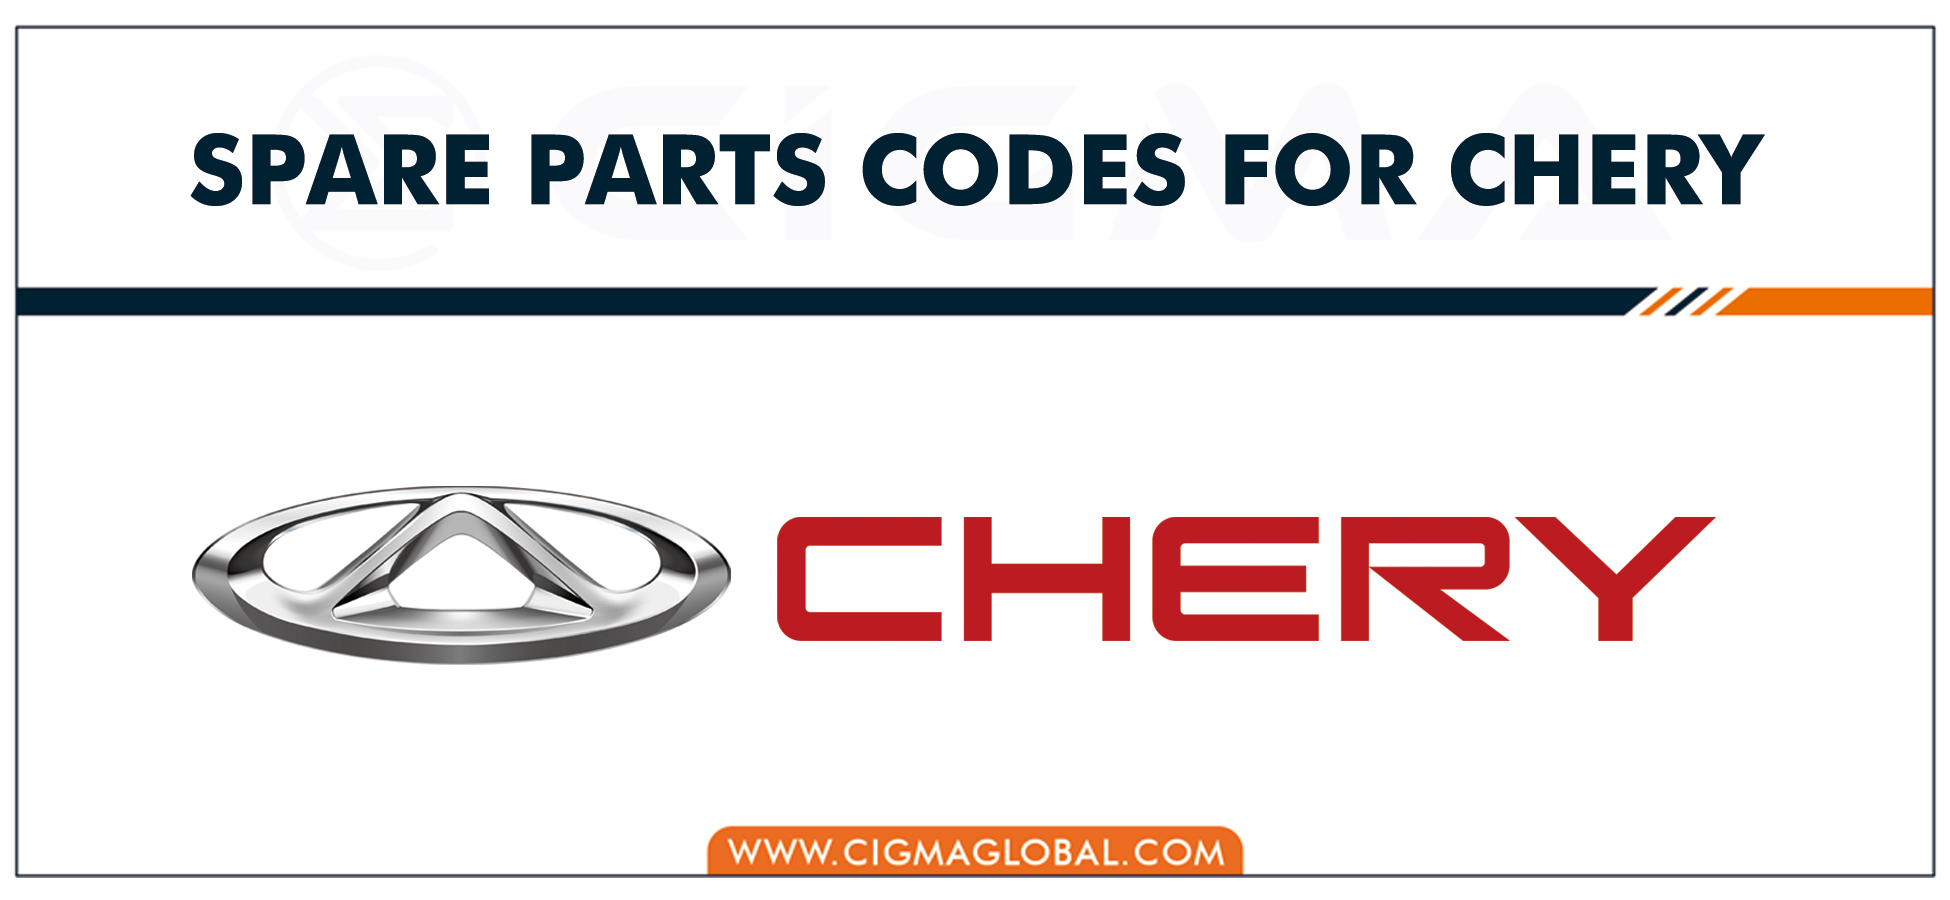 PART CODES FOR CHERY